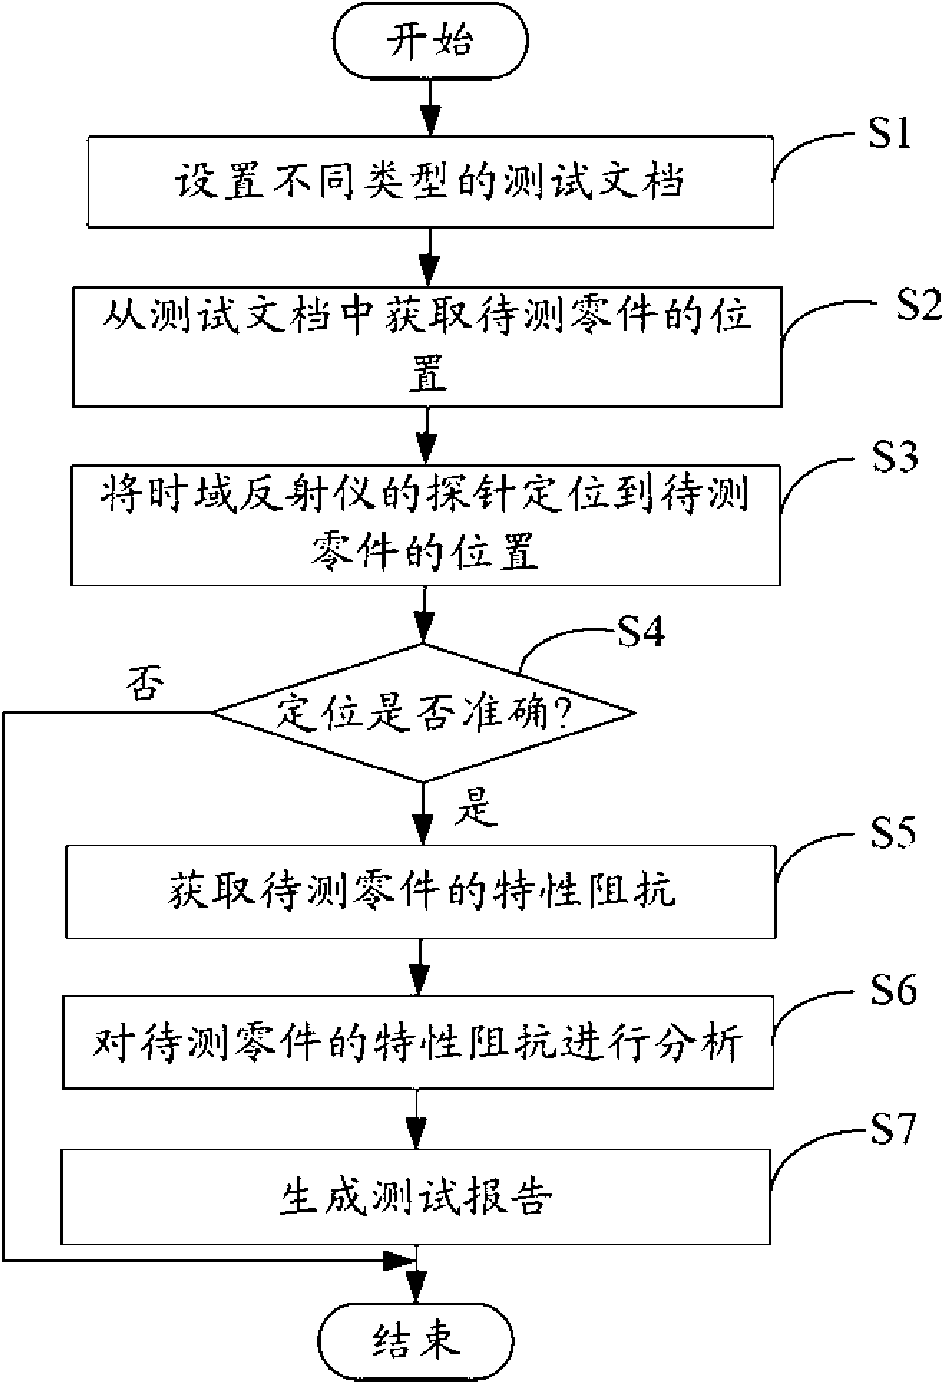 Characteristic impedance testing system and method